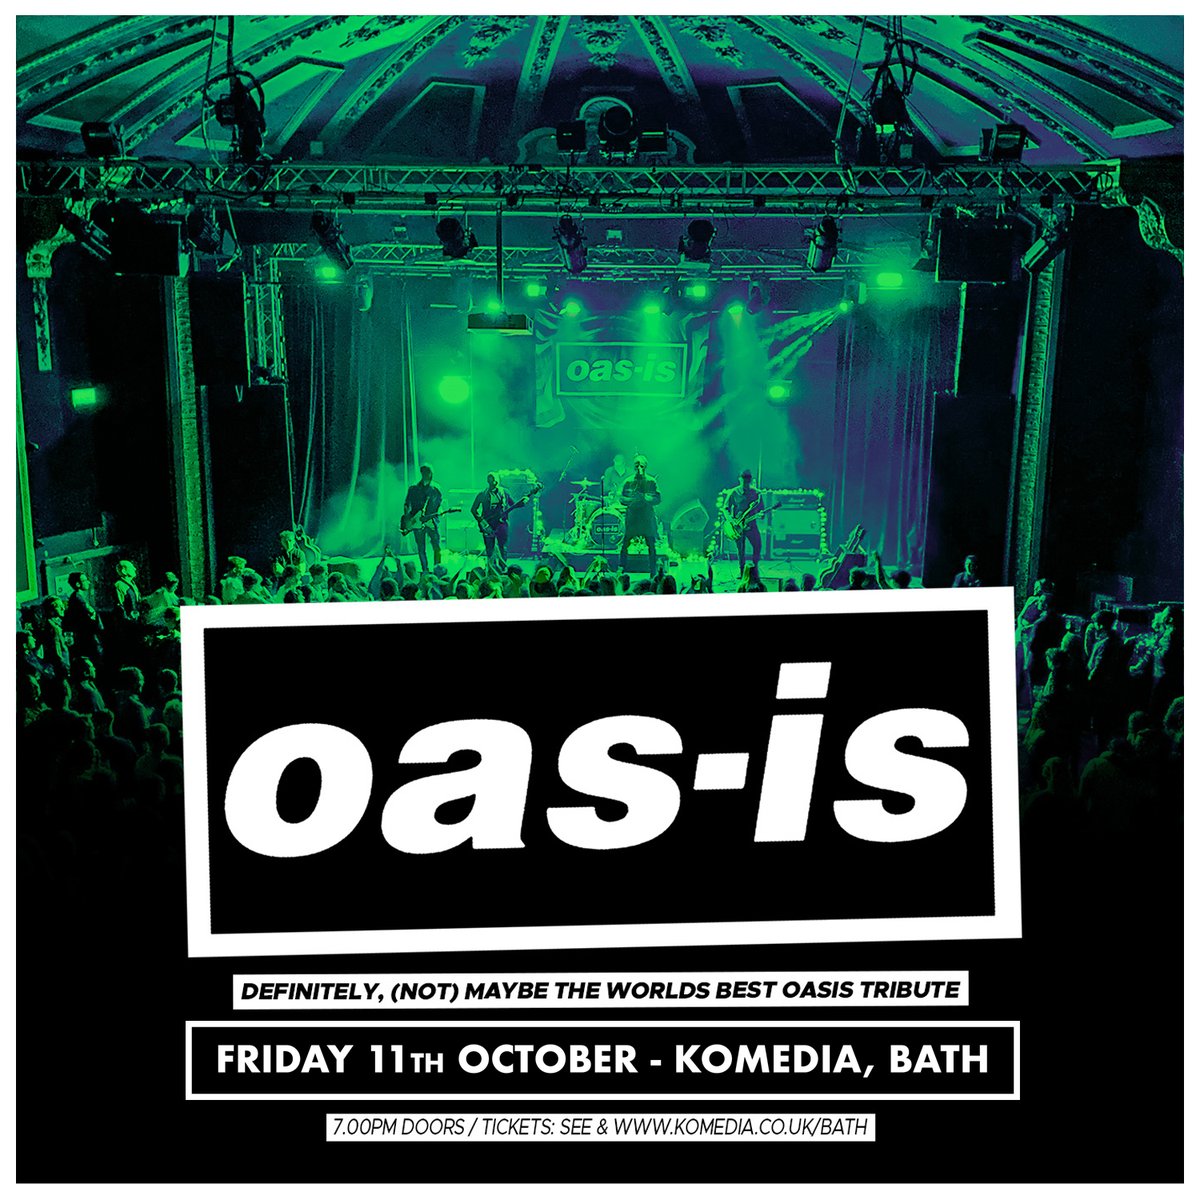 Back by popular demand once more, we're pleased to announce @Oas_is_official will be returning to Komedia on Friday 11 October! 🎸 No wigs, no fancy gimmicks, just the closest you will get to recreating the sound of Oasis. 🎟 BOOK NOW: komediabath.co.uk/events/1285250…